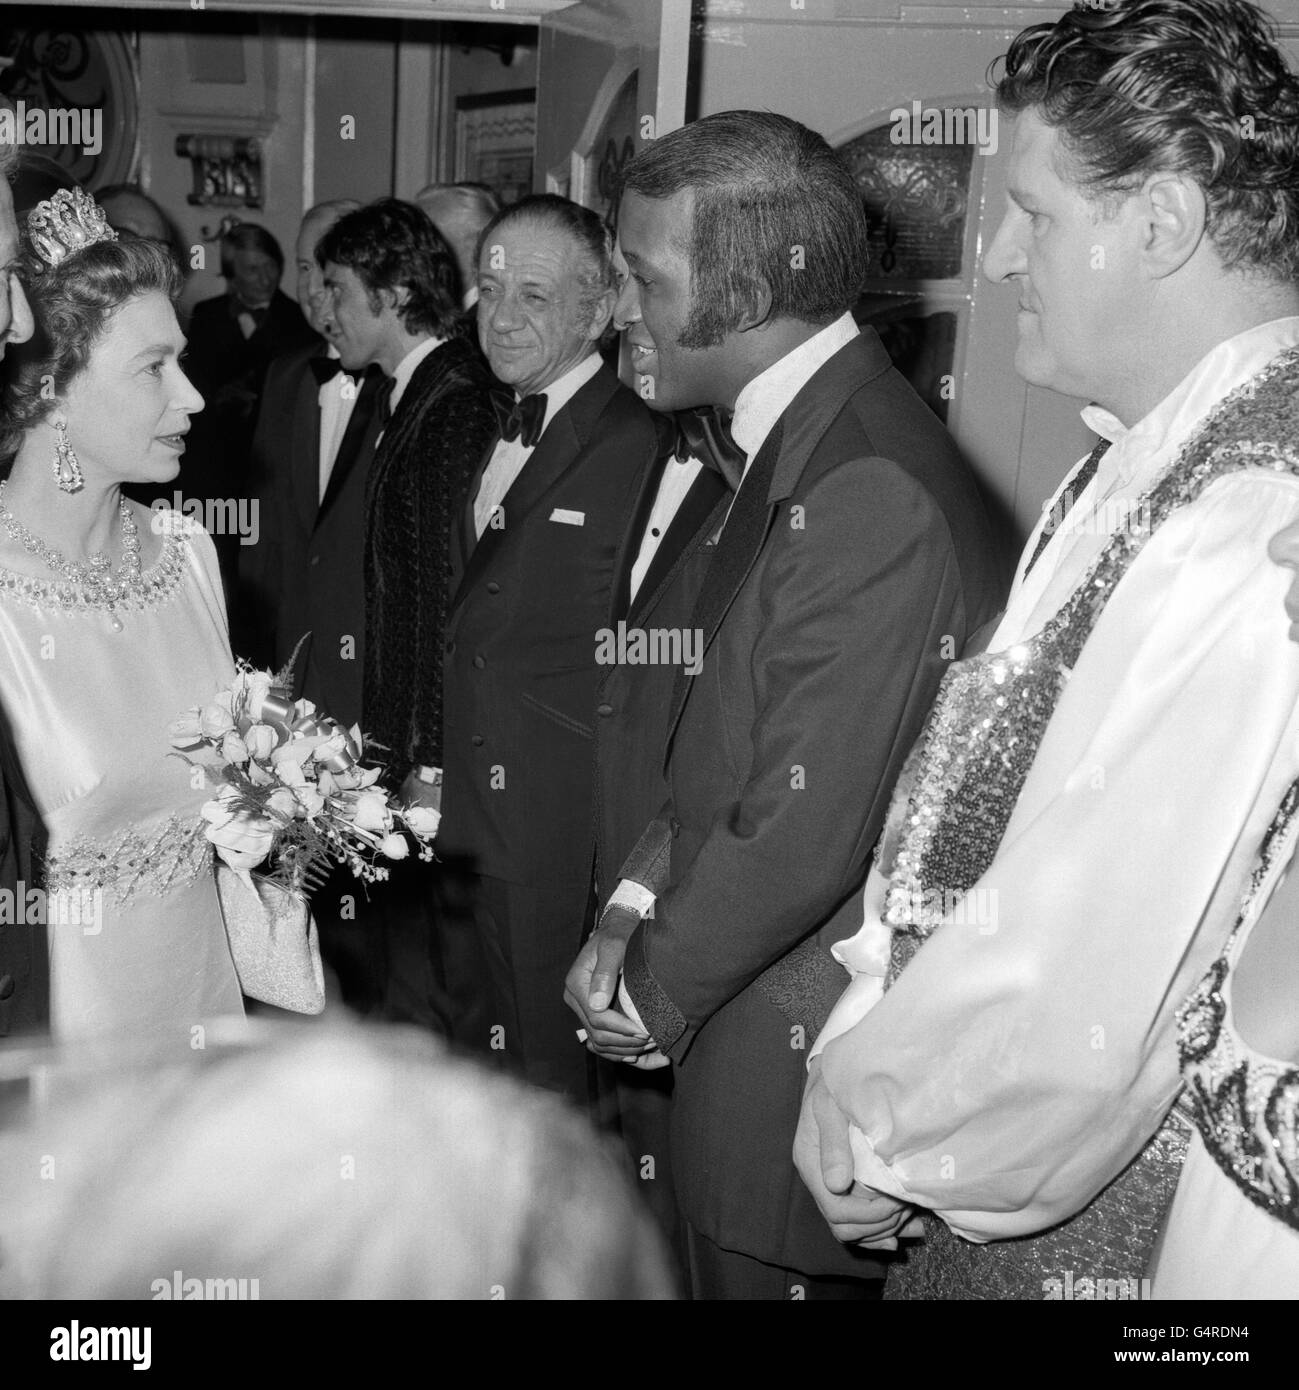 Queen Elizabeth II meeting American singer Lovelace Watkins at the Royal Variety Performance, London Palladium. Next to Watkins are comedians Sid James, left, and Tommy Cooper, right. Stock Photo